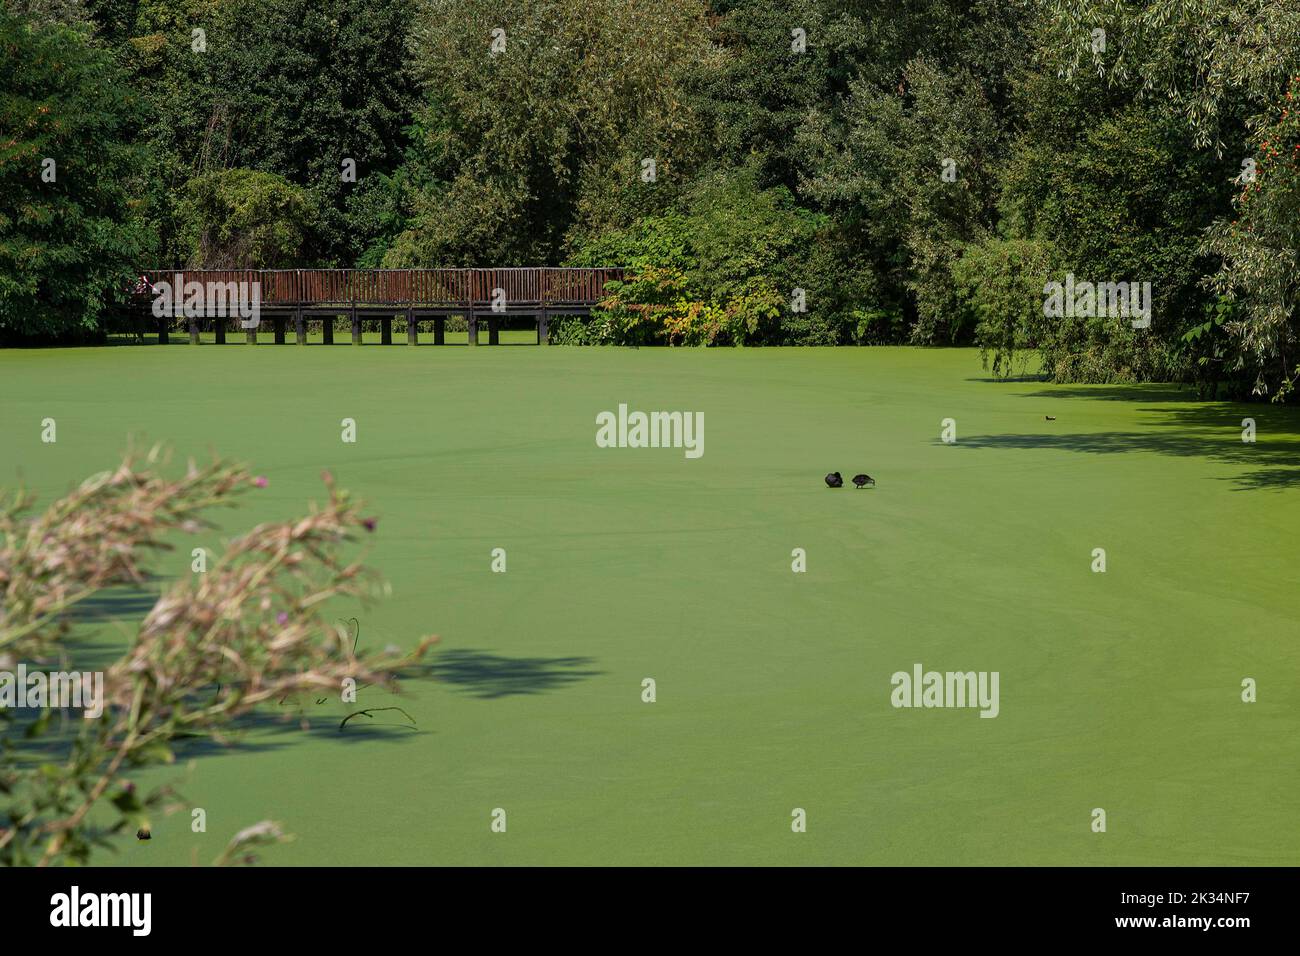 pond covered with green duckweed on the surface, with trees around Stock Photo